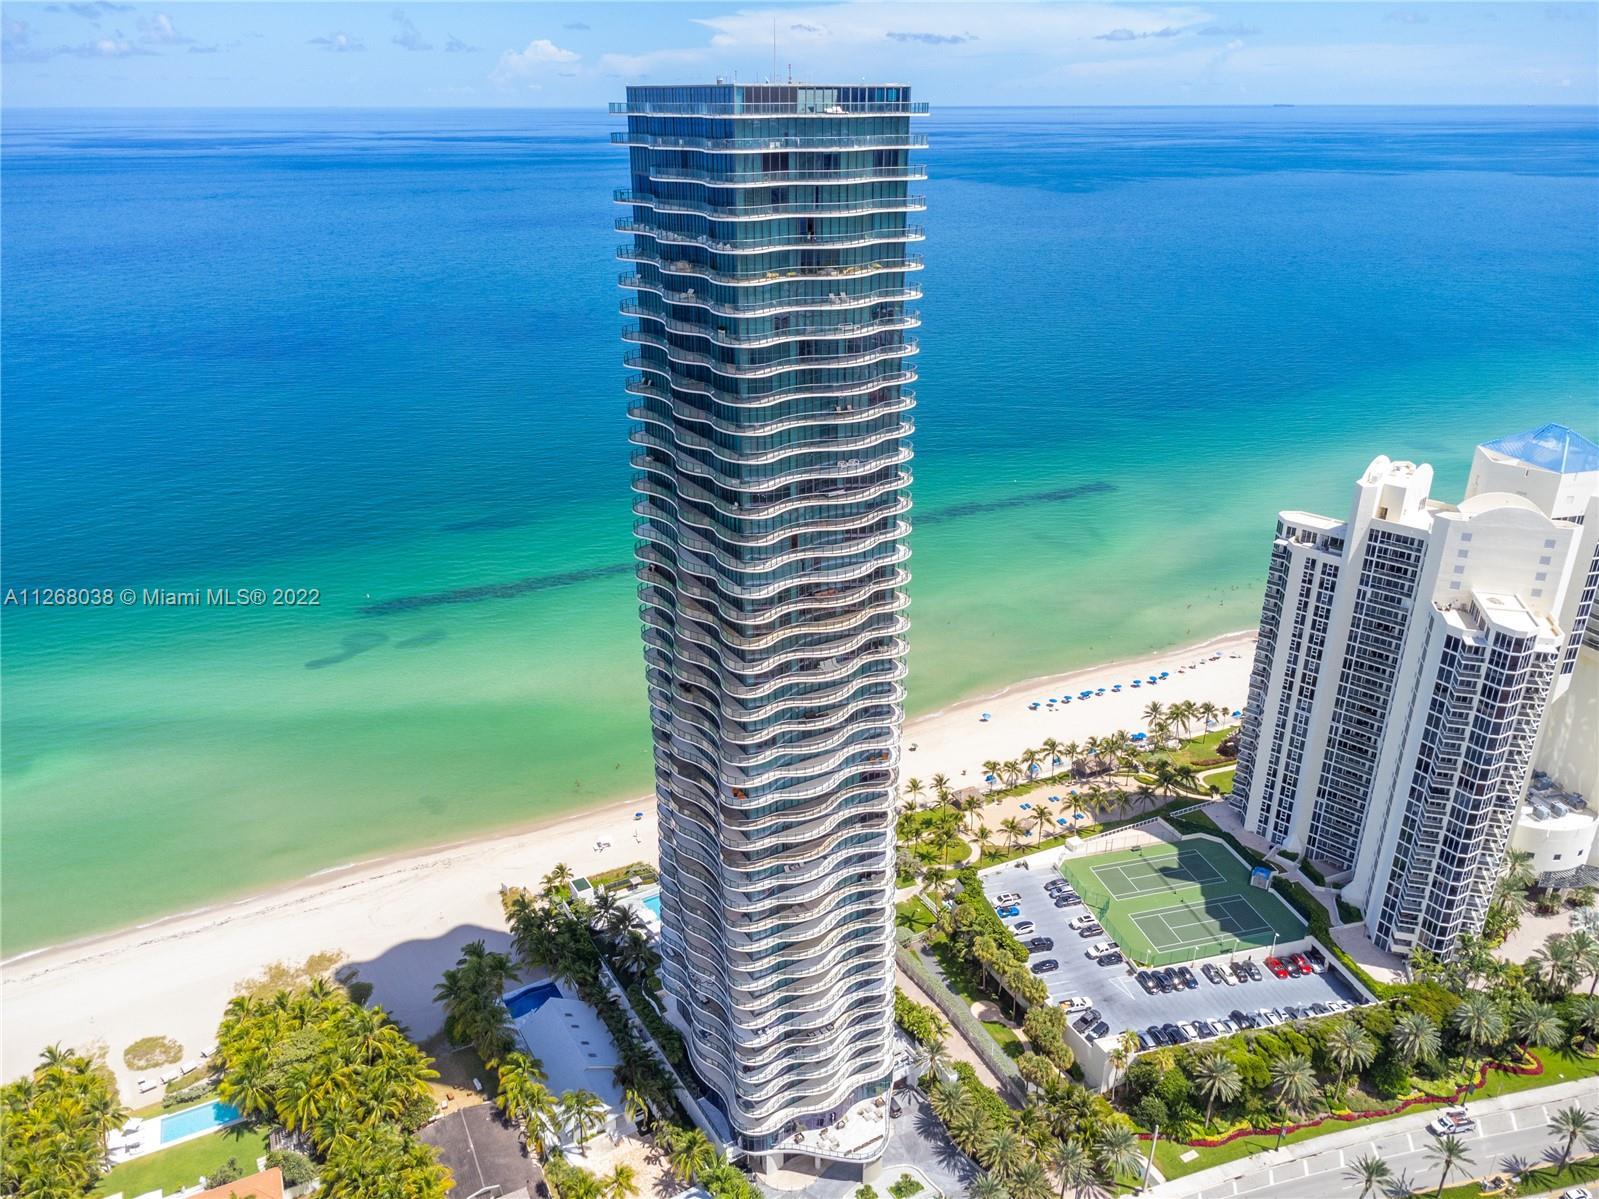 EAST, WEST, NORTH, SOUTH: Own Your 360-Degree Views. A private elevator takes you to your oceanfront